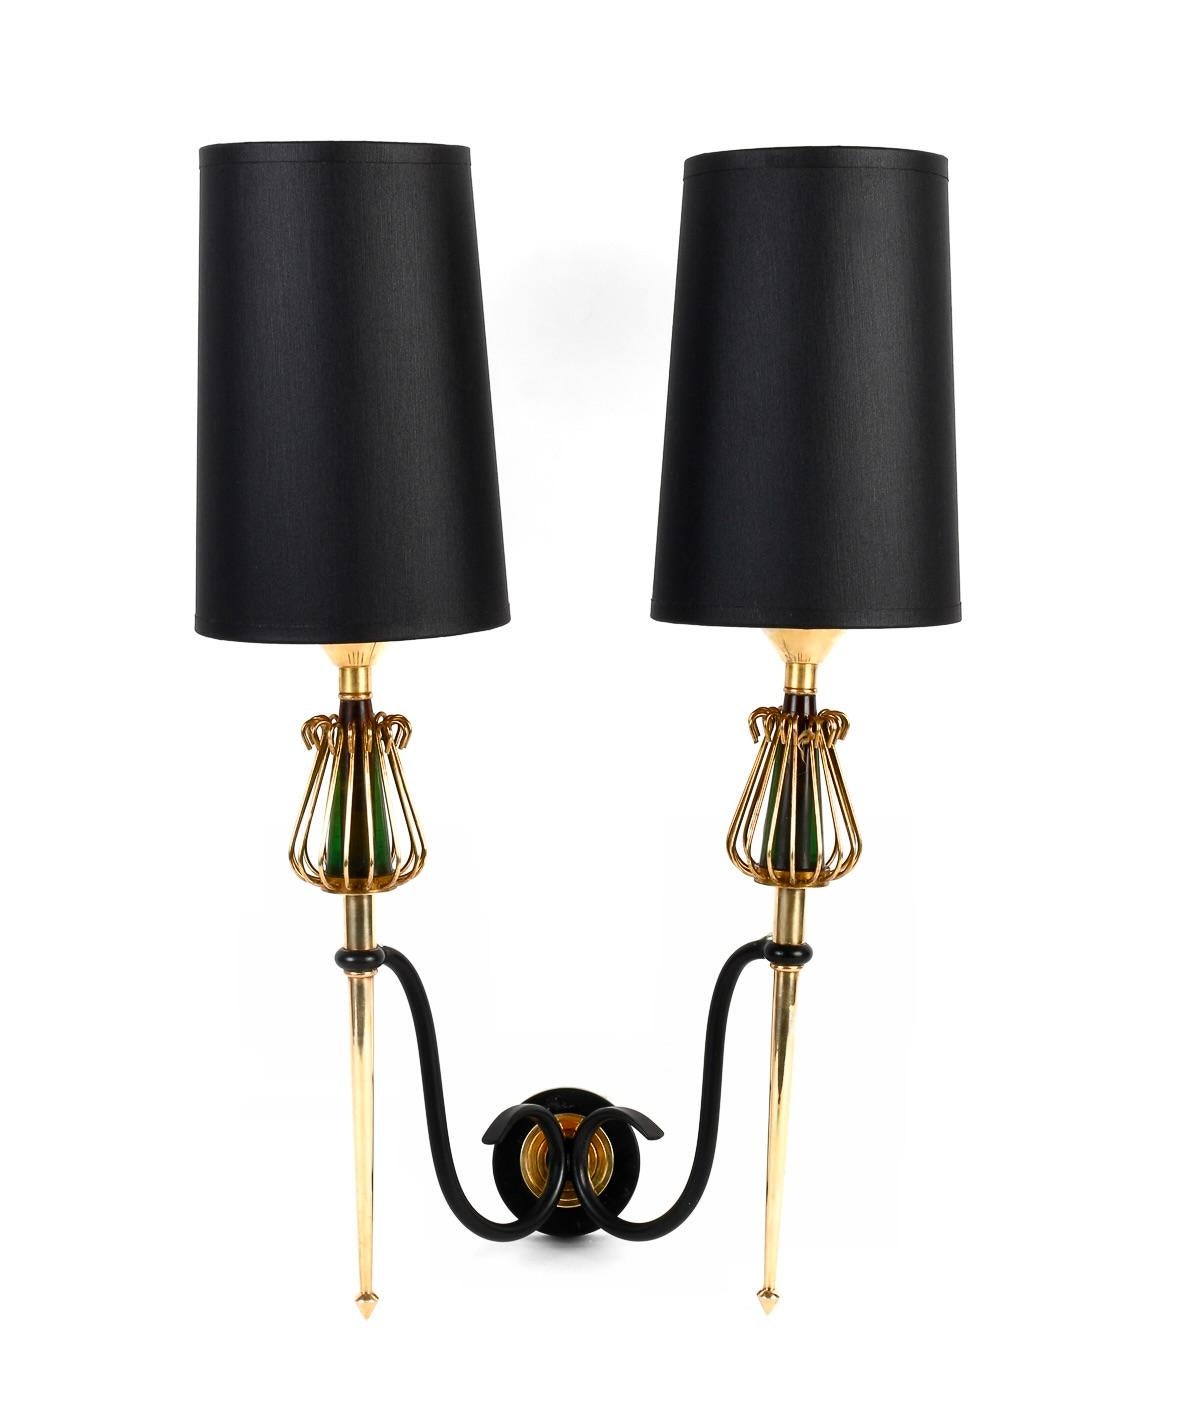 Composed of a circular wall support on which rest two black wrought-iron arms distributed on either side of the sconce.
They support two light arms composed of two spiked rods in gilded brass, enhanced at the top by two cages in gilded brass wire in